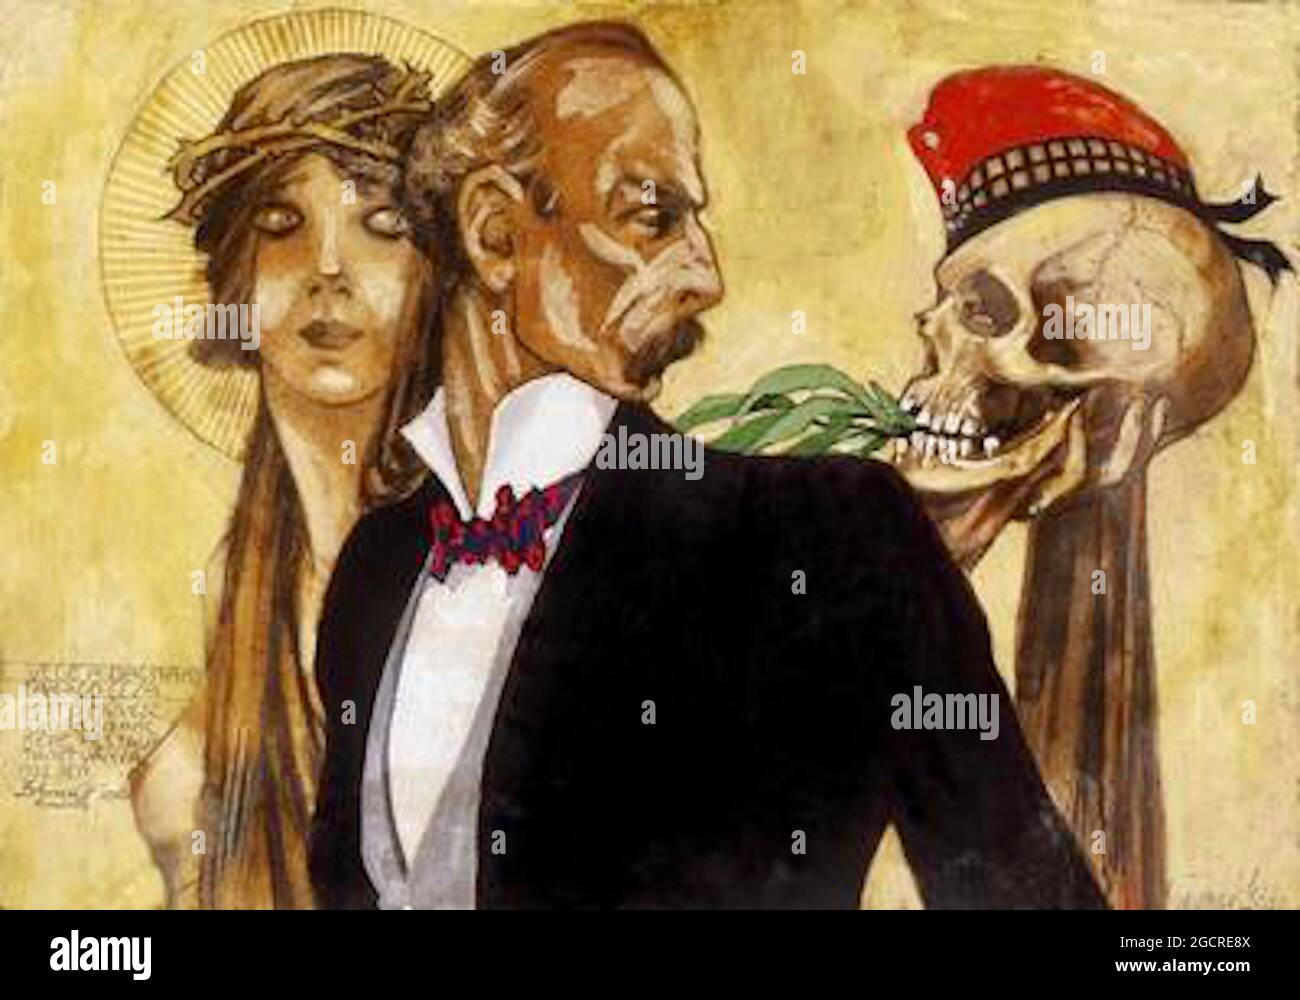 Géza Faragó artwork entitled The End of War - 1918 - Well dressed gentleman looks back to the war and a masculine skull. Ahead lies feminine hope. Stock Photo